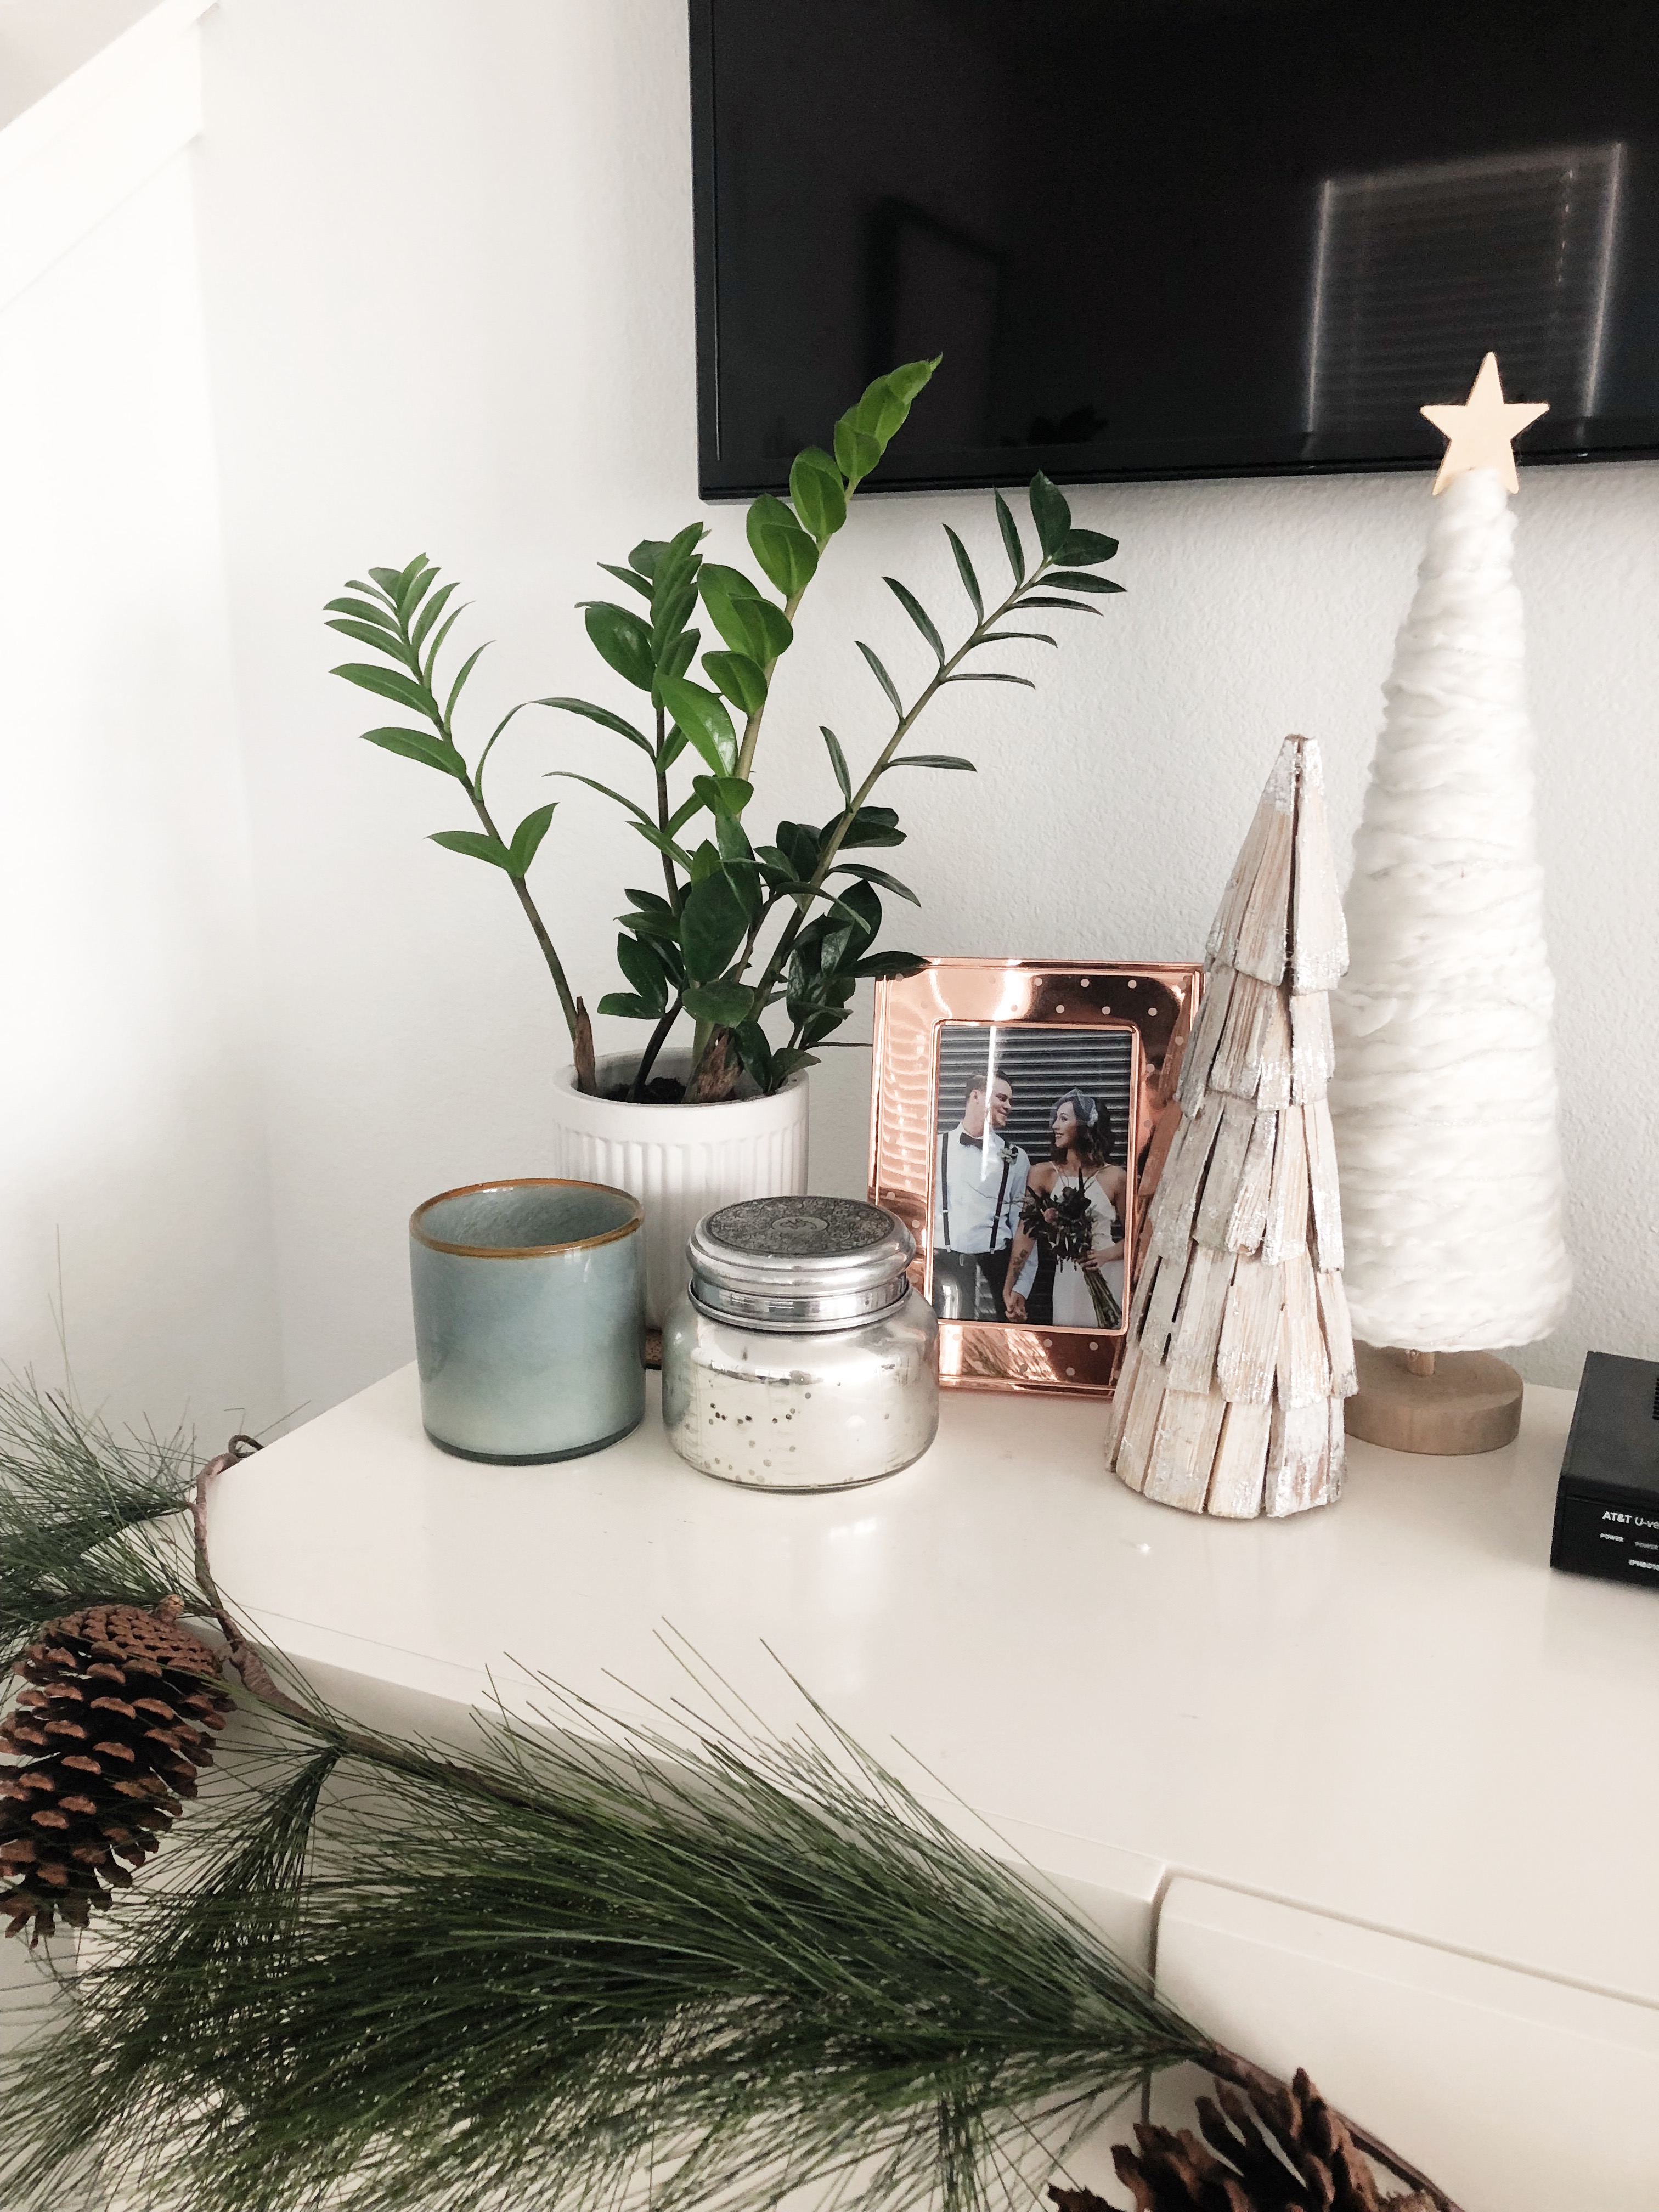 Tips for Holiday Decor on a Budget